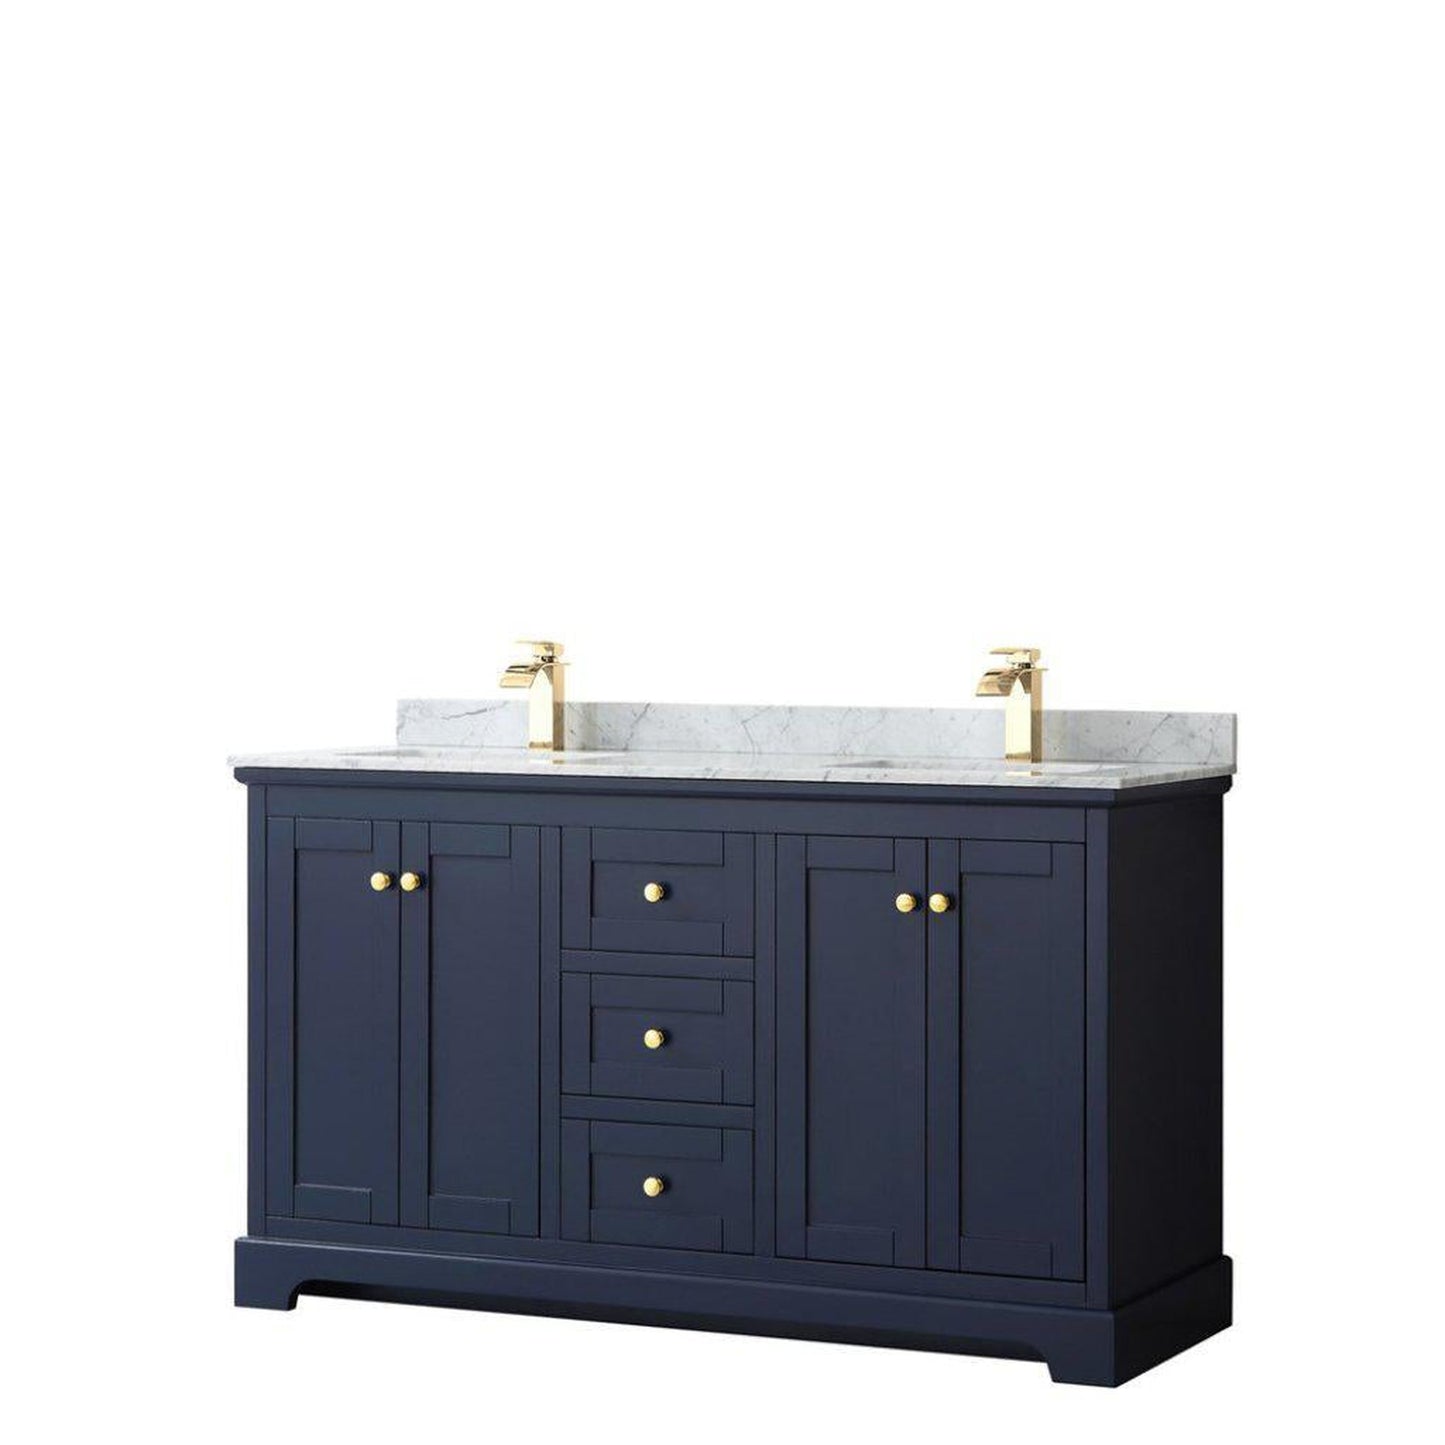 Wyndham Collection Avery 60" Dark Blue Double Bathroom Vanity With White Carrara Marble Countertop With 1-Hole Faucet And Square Sink